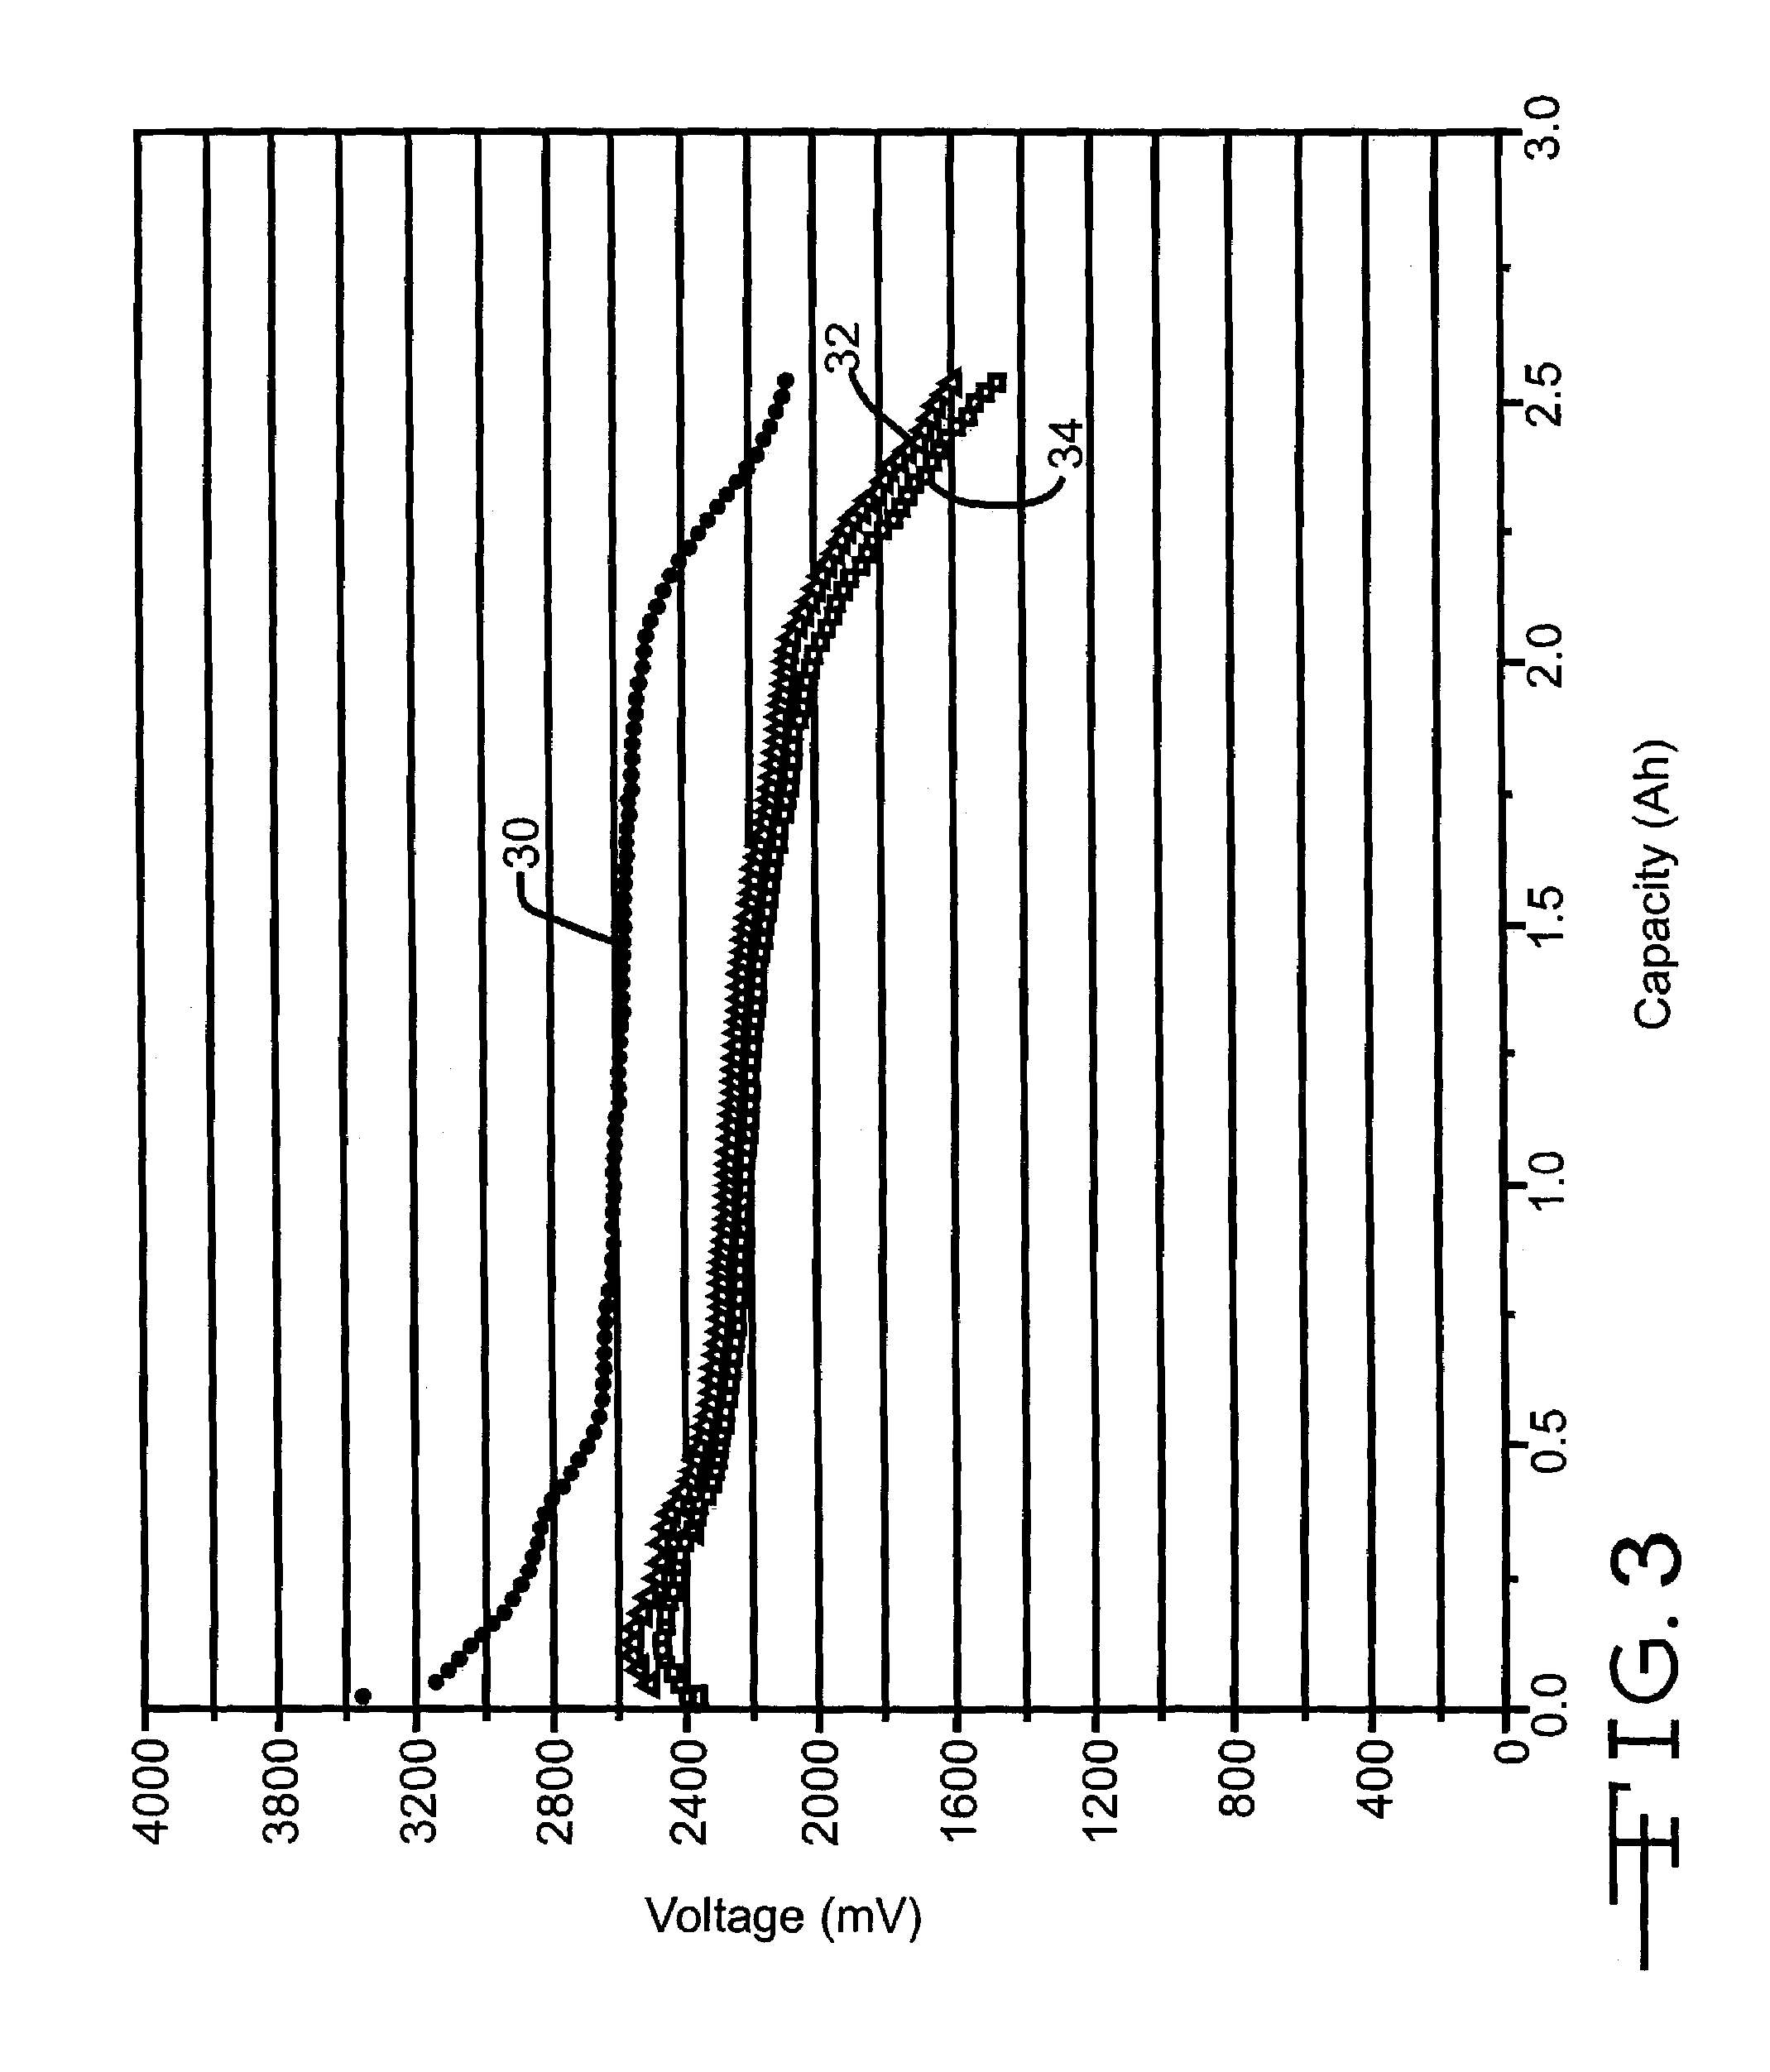 Method for using high rate lithium electrochemical cell containing SVO/CFchi/SVo sandwich cathodes having gamma-SVO and mixture of gamma-SVO/epsilon-SVO